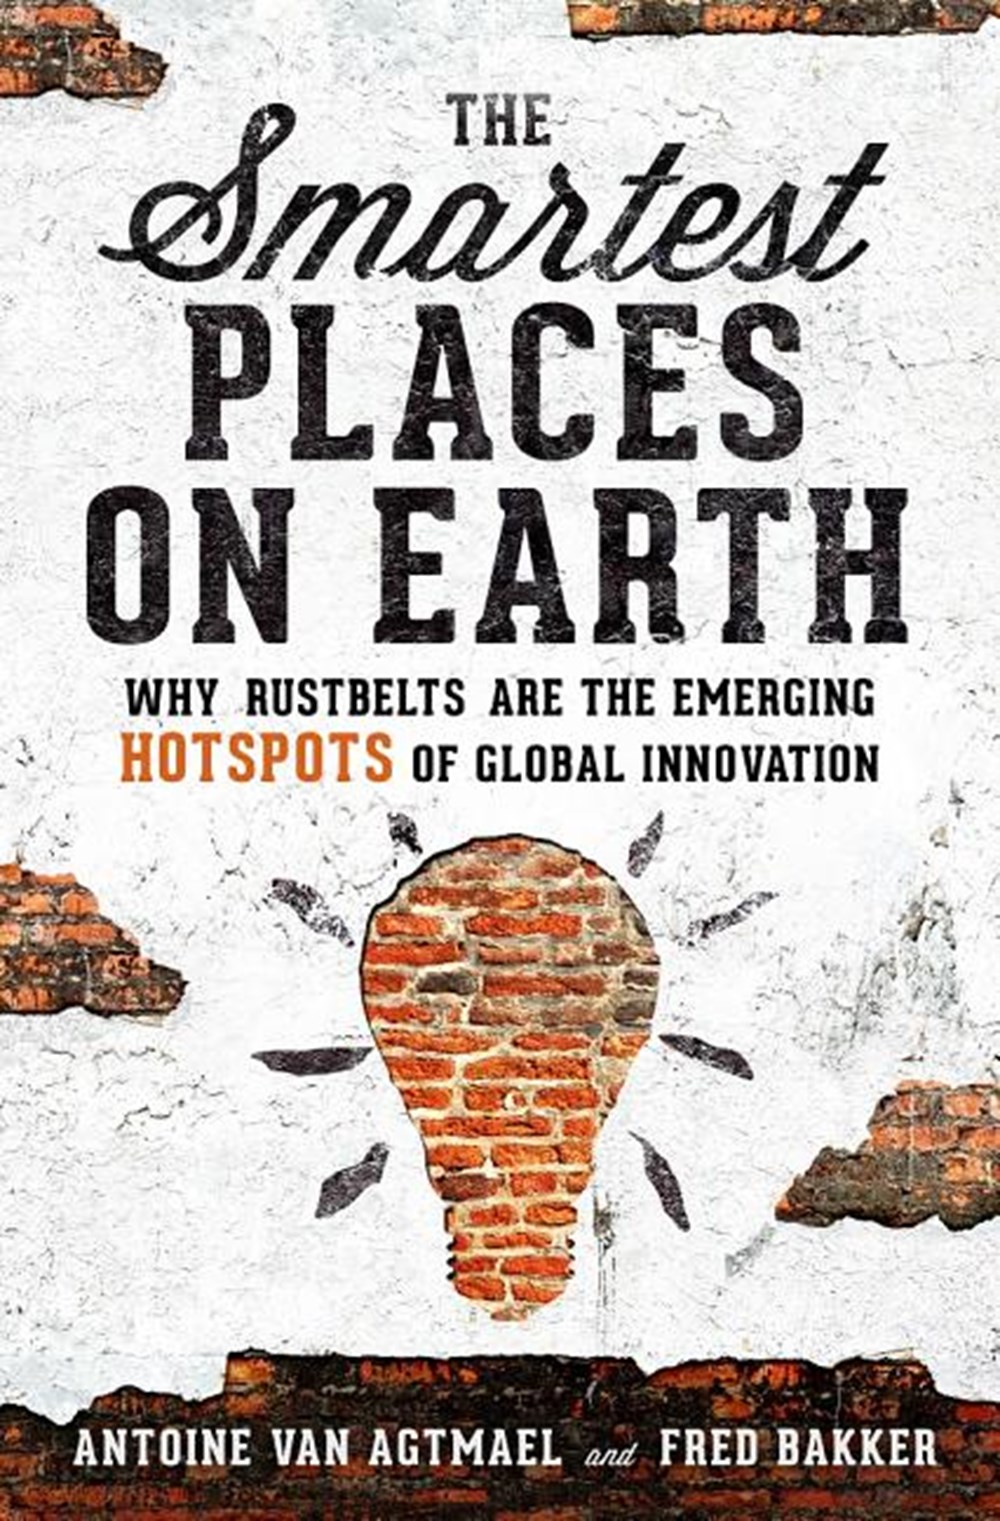 Smartest Places on Earth: Why Rustbelts Are the Emerging Hotspots of Global Innovation